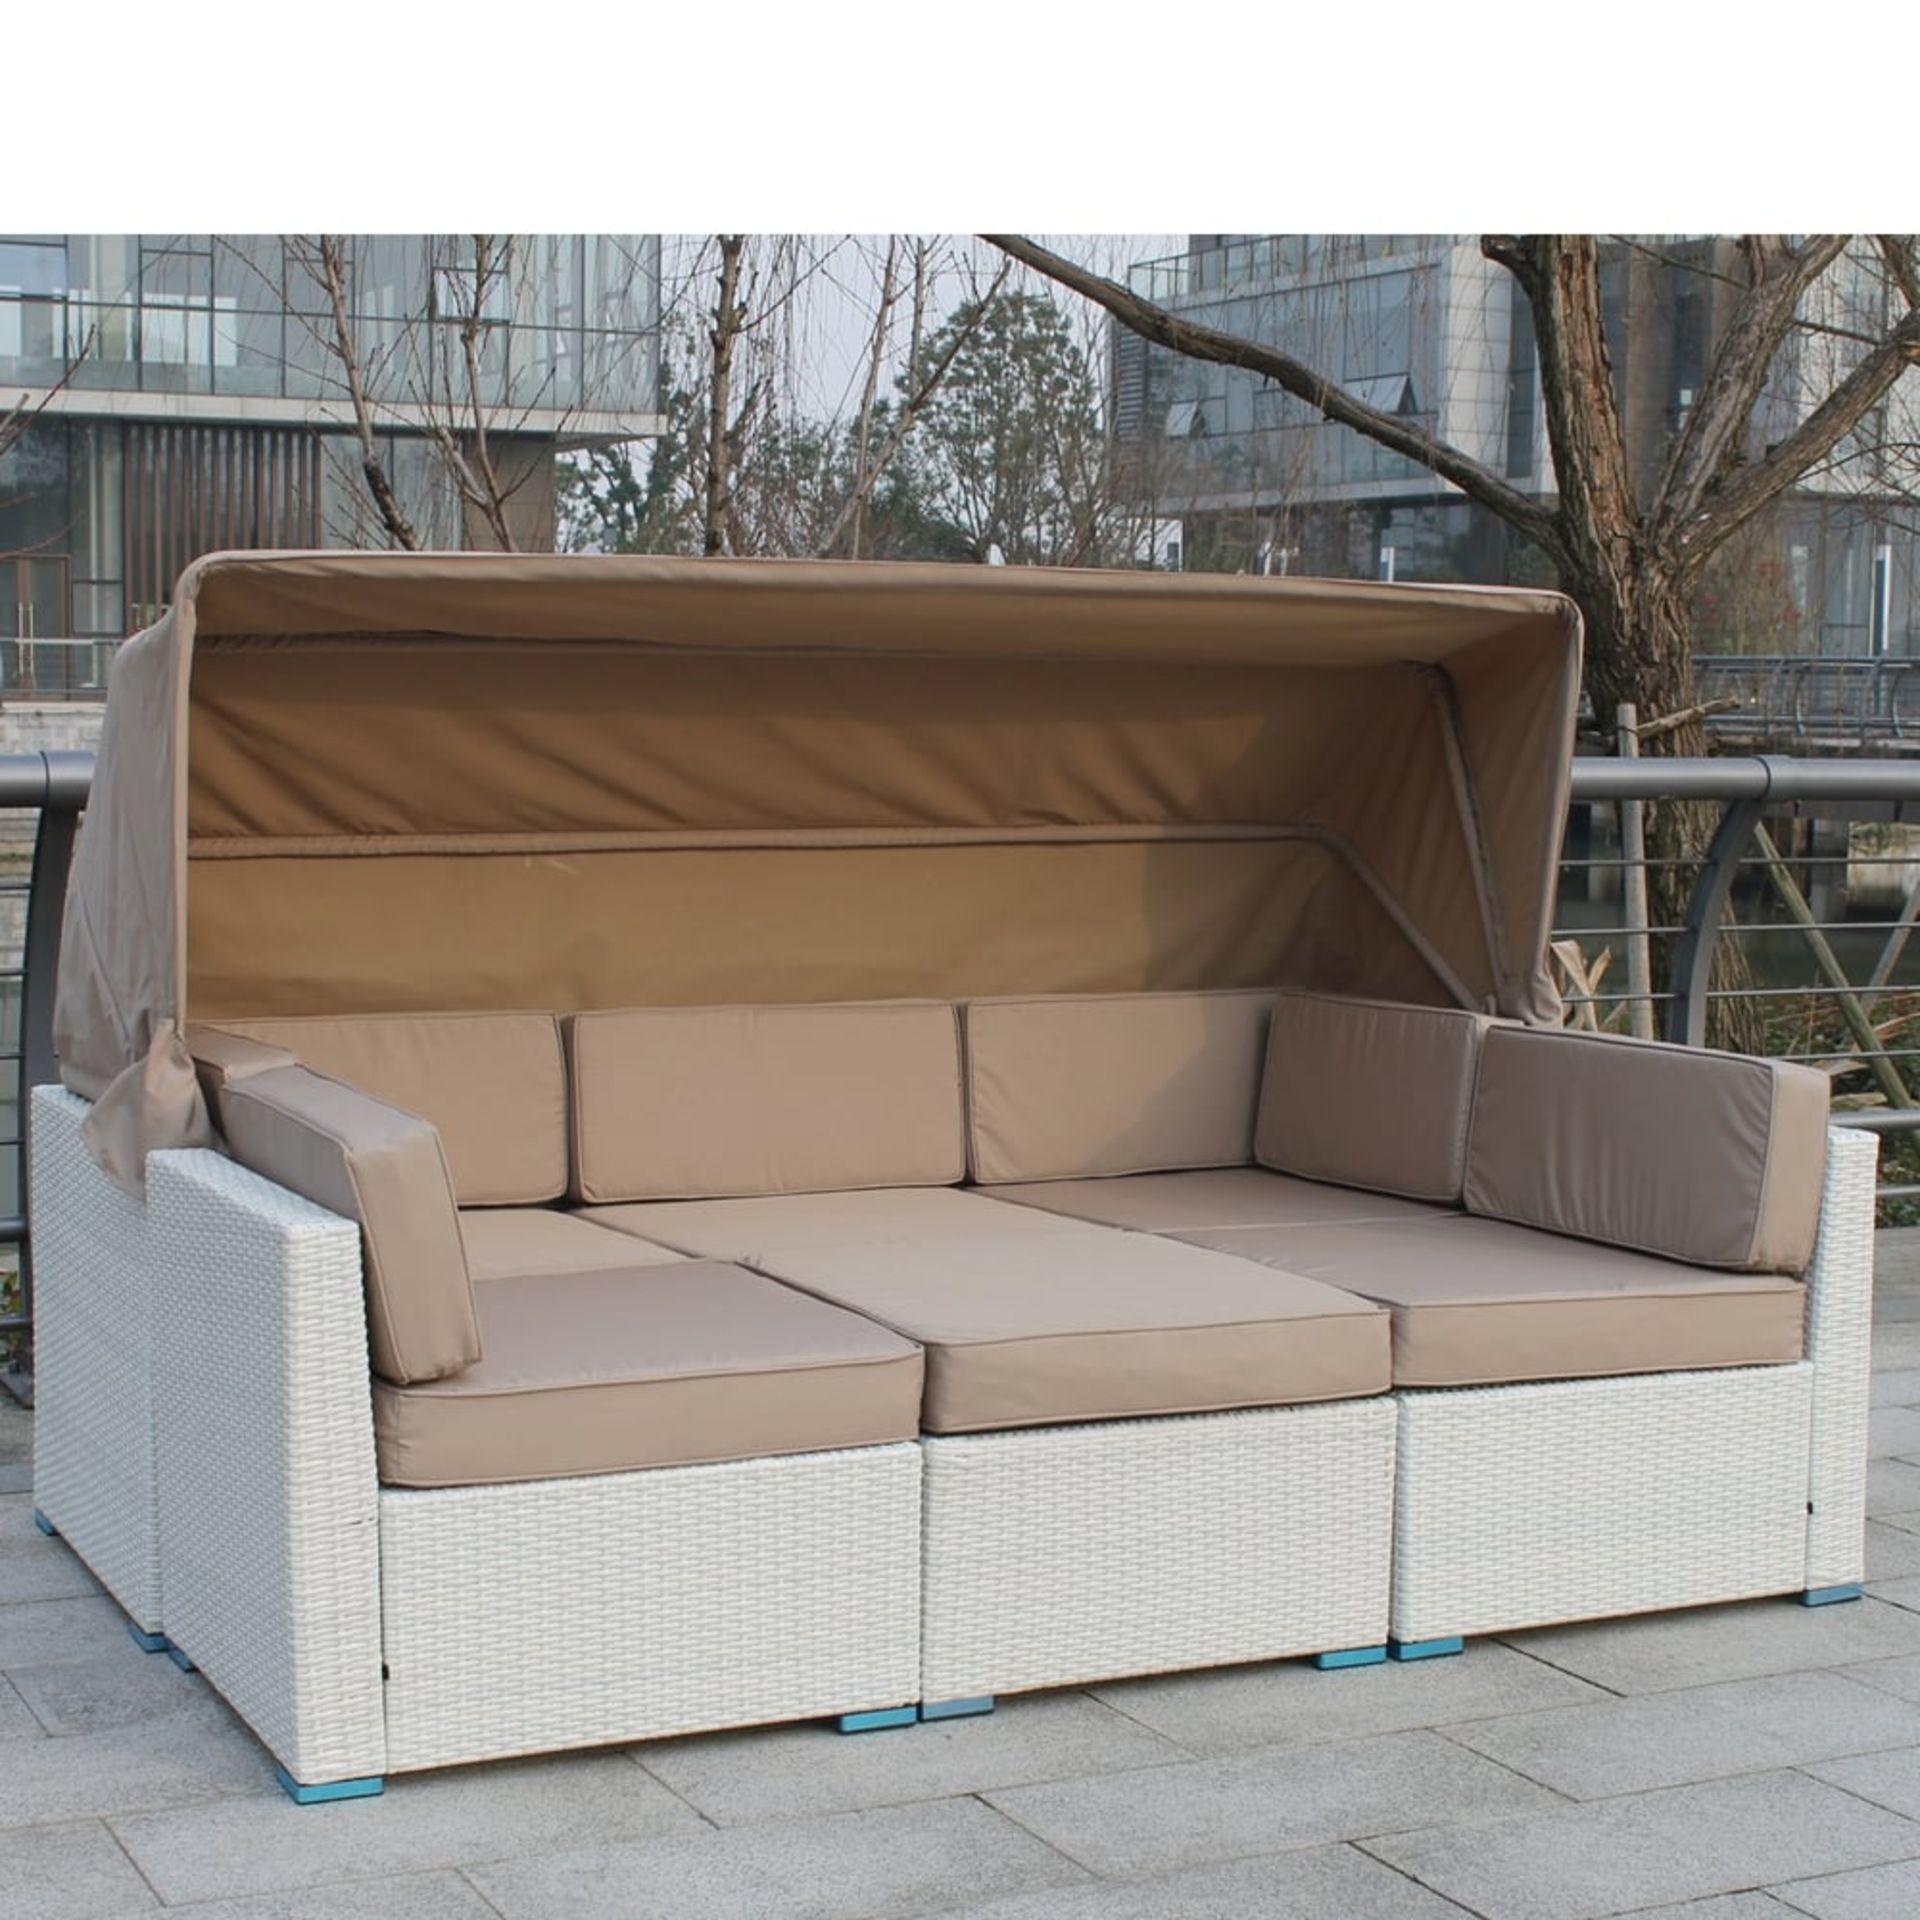 Altrincham Five Seat Rattan Sofa Set with Table new and boxed white pu rattan. - Image 3 of 3